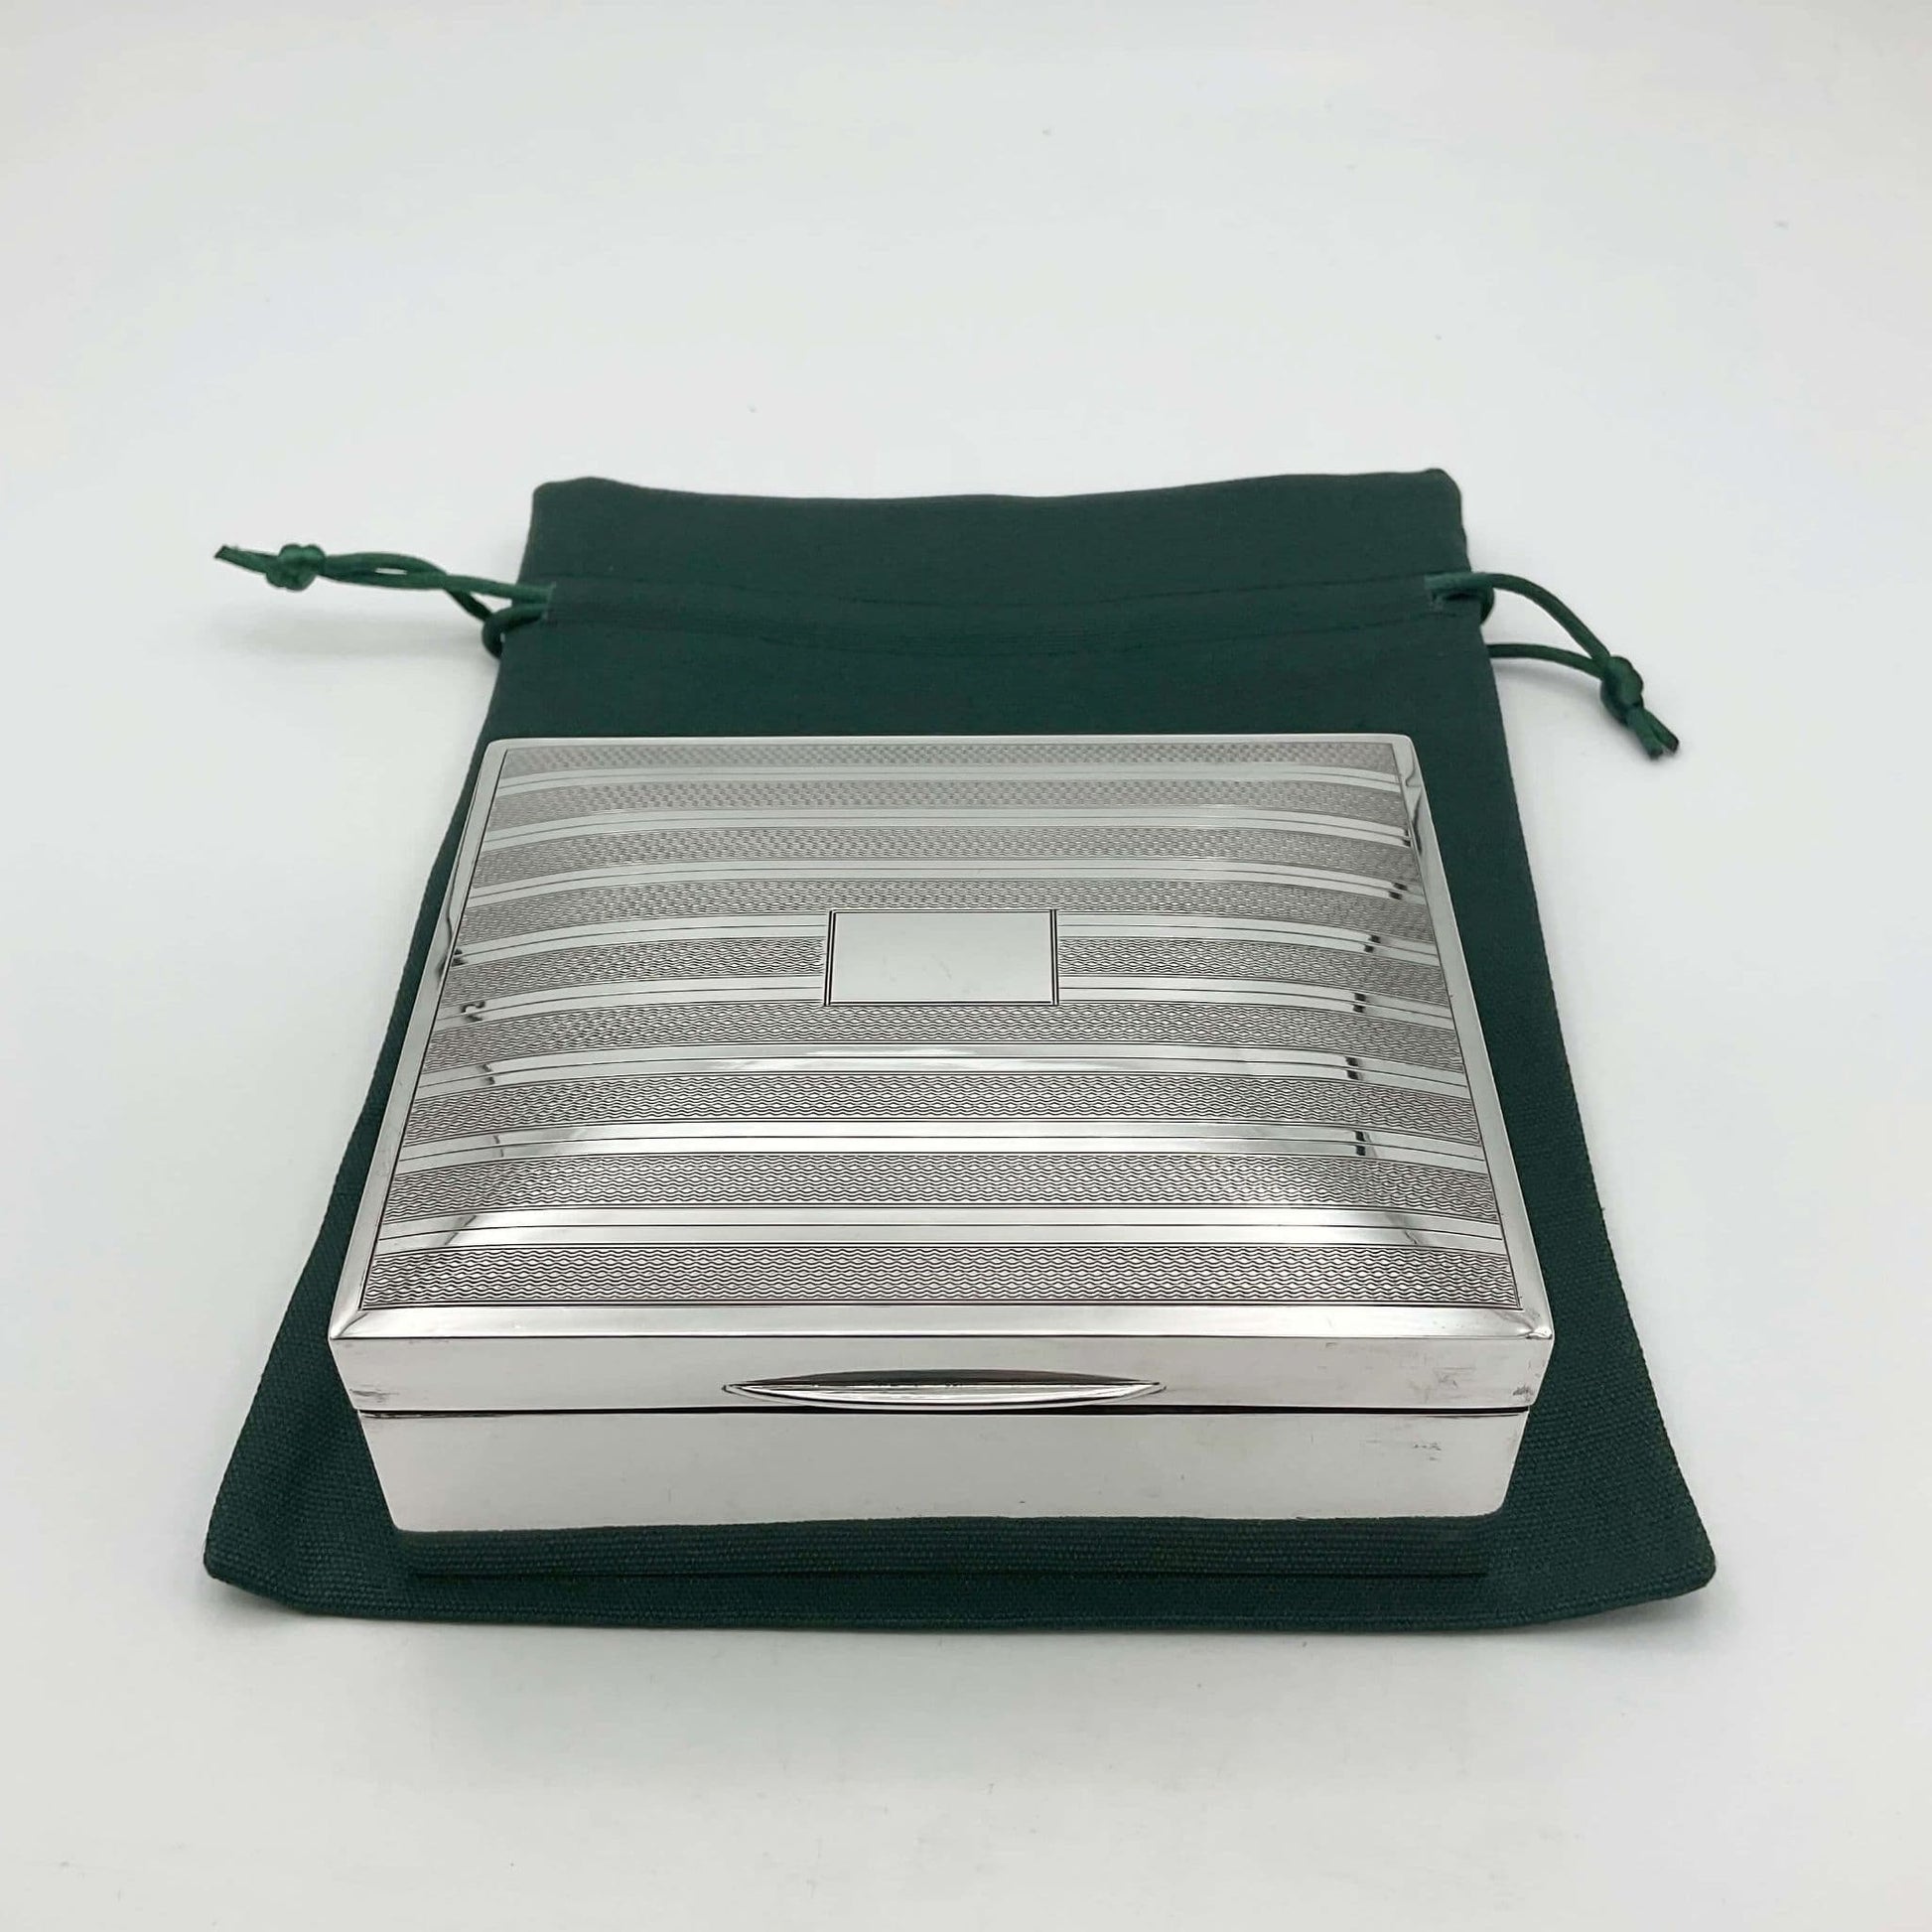 Vintage Sterling Silver Cigarette box with a striped pattern across the lid and a blank rectangular square in the centre. The cigarette  box is sitting on a green cotton bag.